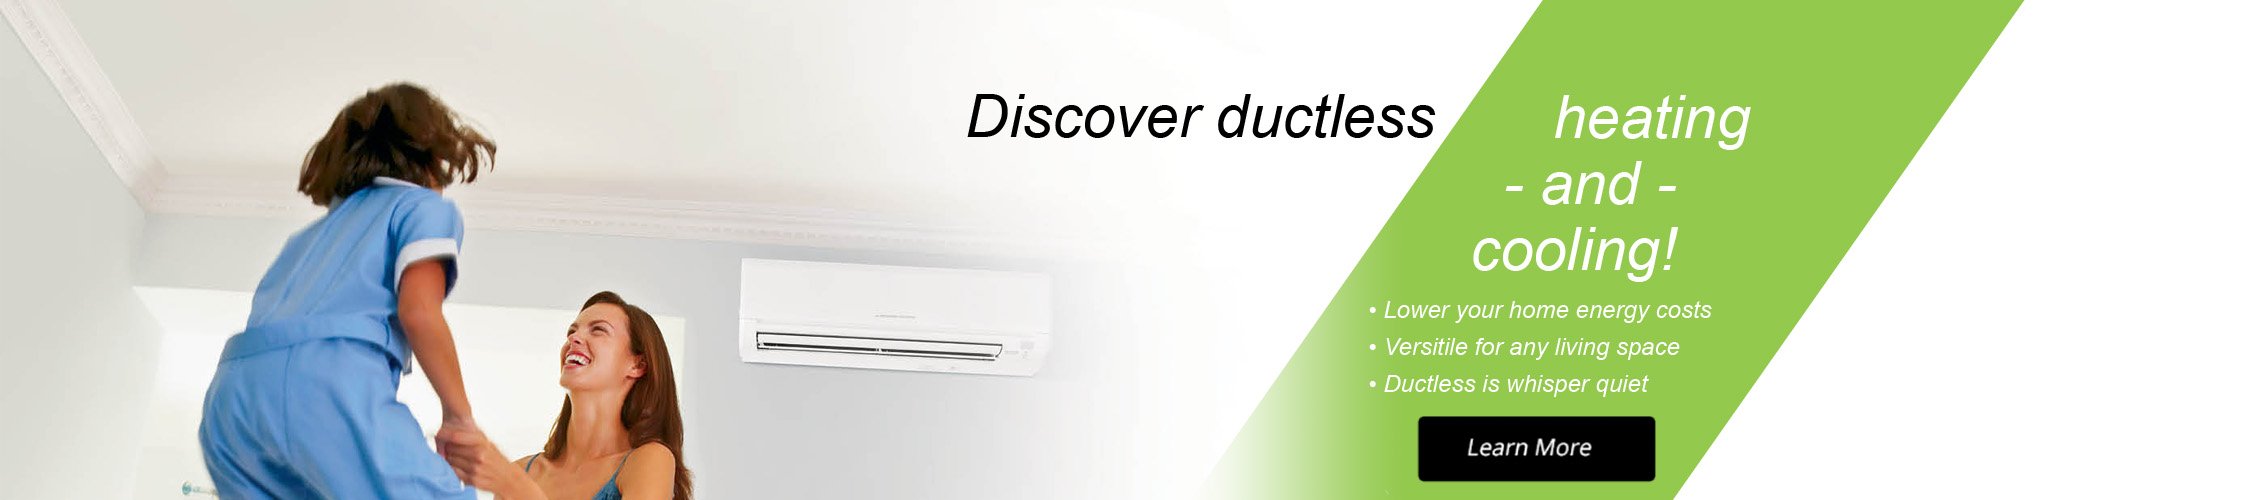 Ductless mini split heating and air conditioning